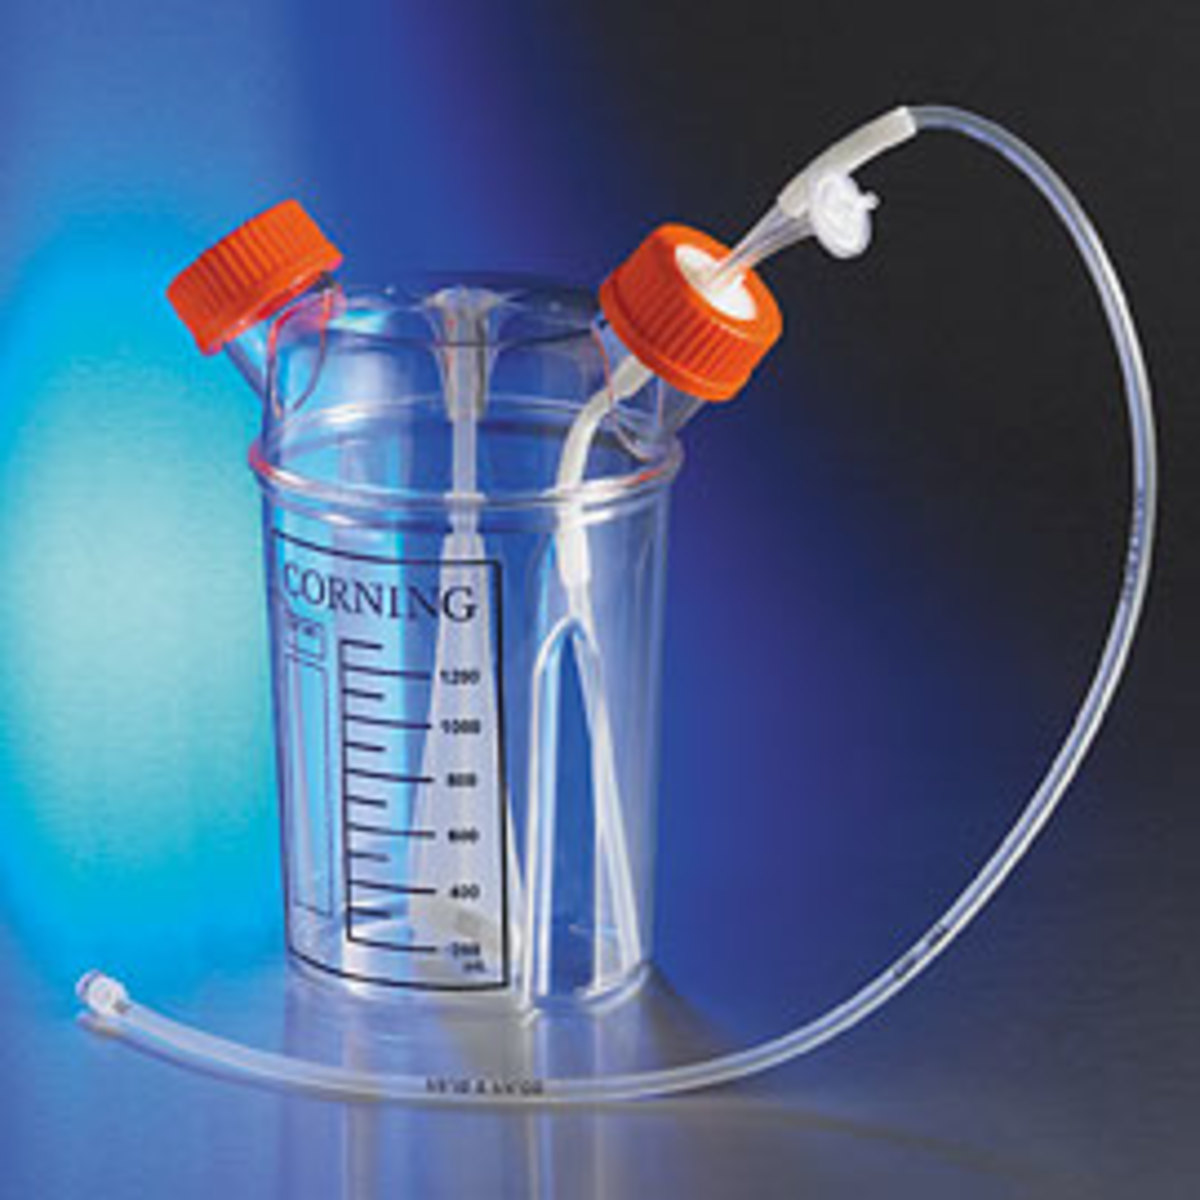 https://www.corning.com/catalog/cls/products/p/preassembledClosedSystemSolutionsForDisposableSpinnerFlasks/3569/images/3569_A.jpg/_jcr_content/renditions/product.zoom.1200.jpg